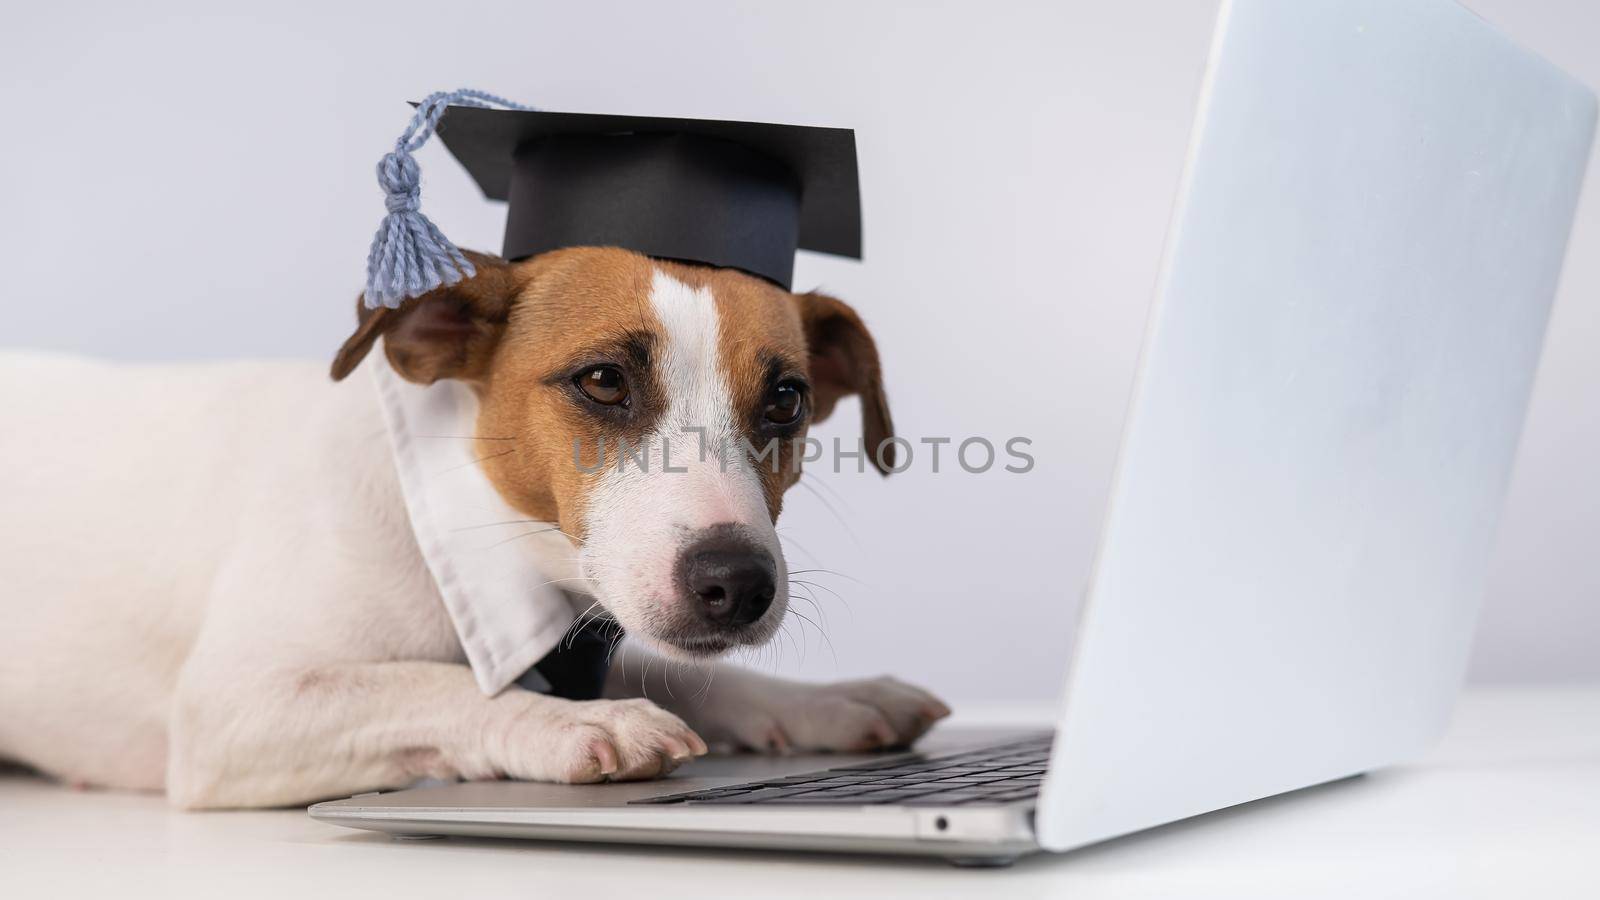 Jack Russell Terrier dog dressed in a tie and an academic cap works at a laptop on a white background. by mrwed54